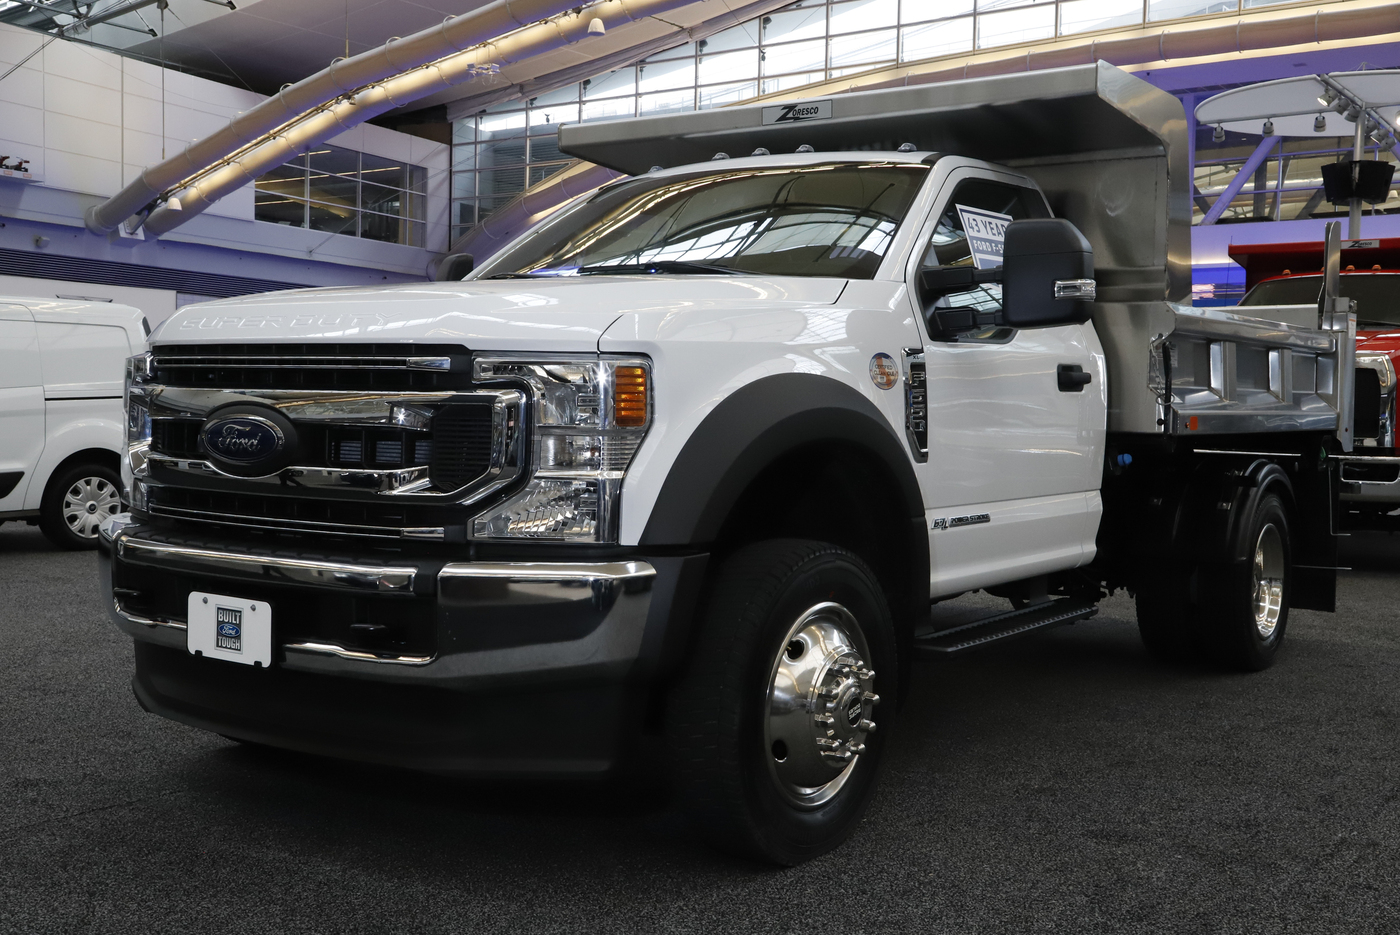 This is a Ford 2020 F550 truck on display at the 2020 Pittsburgh International Auto Show Thursday, Feb.13, 2020 in Pittsburgh. (AP Photo/Gene J. Puskar)